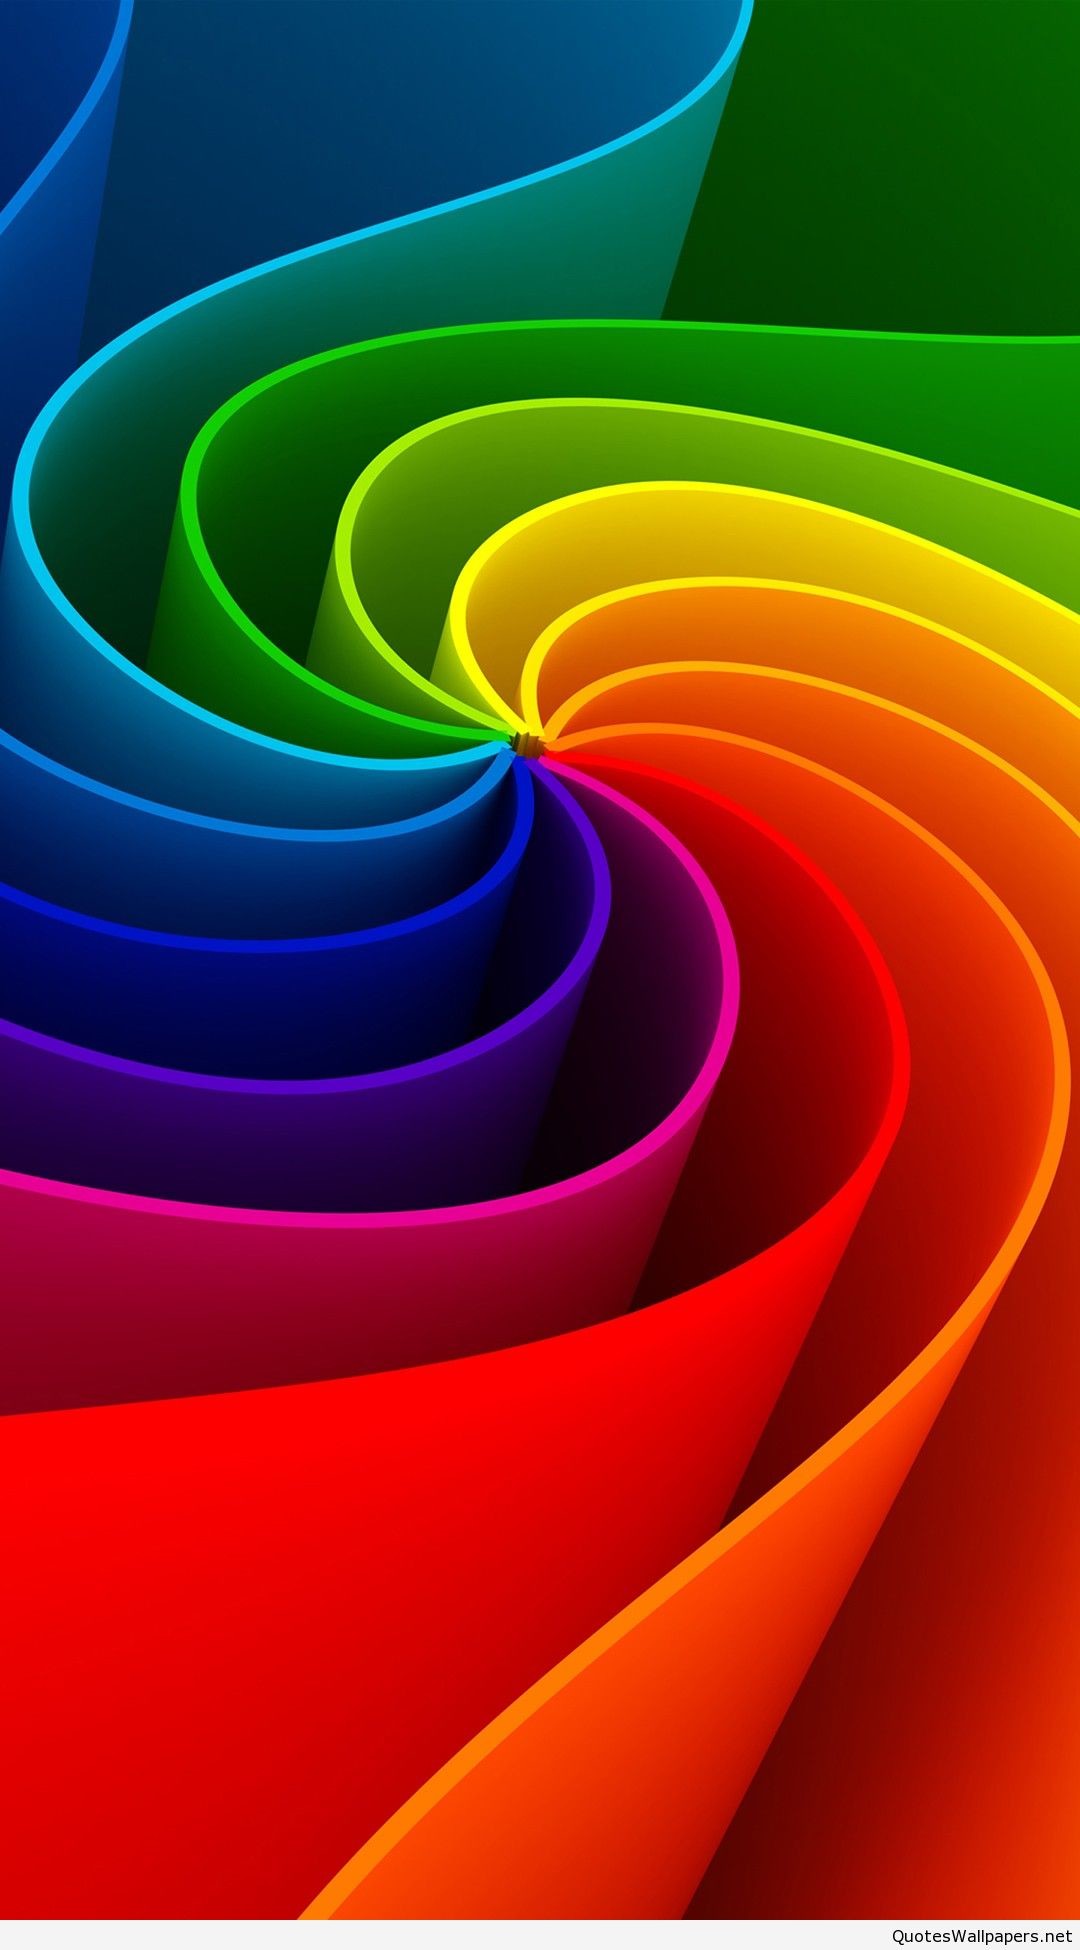 Retina Hd Wallpapers - National Color Day 2019 - HD Wallpaper 